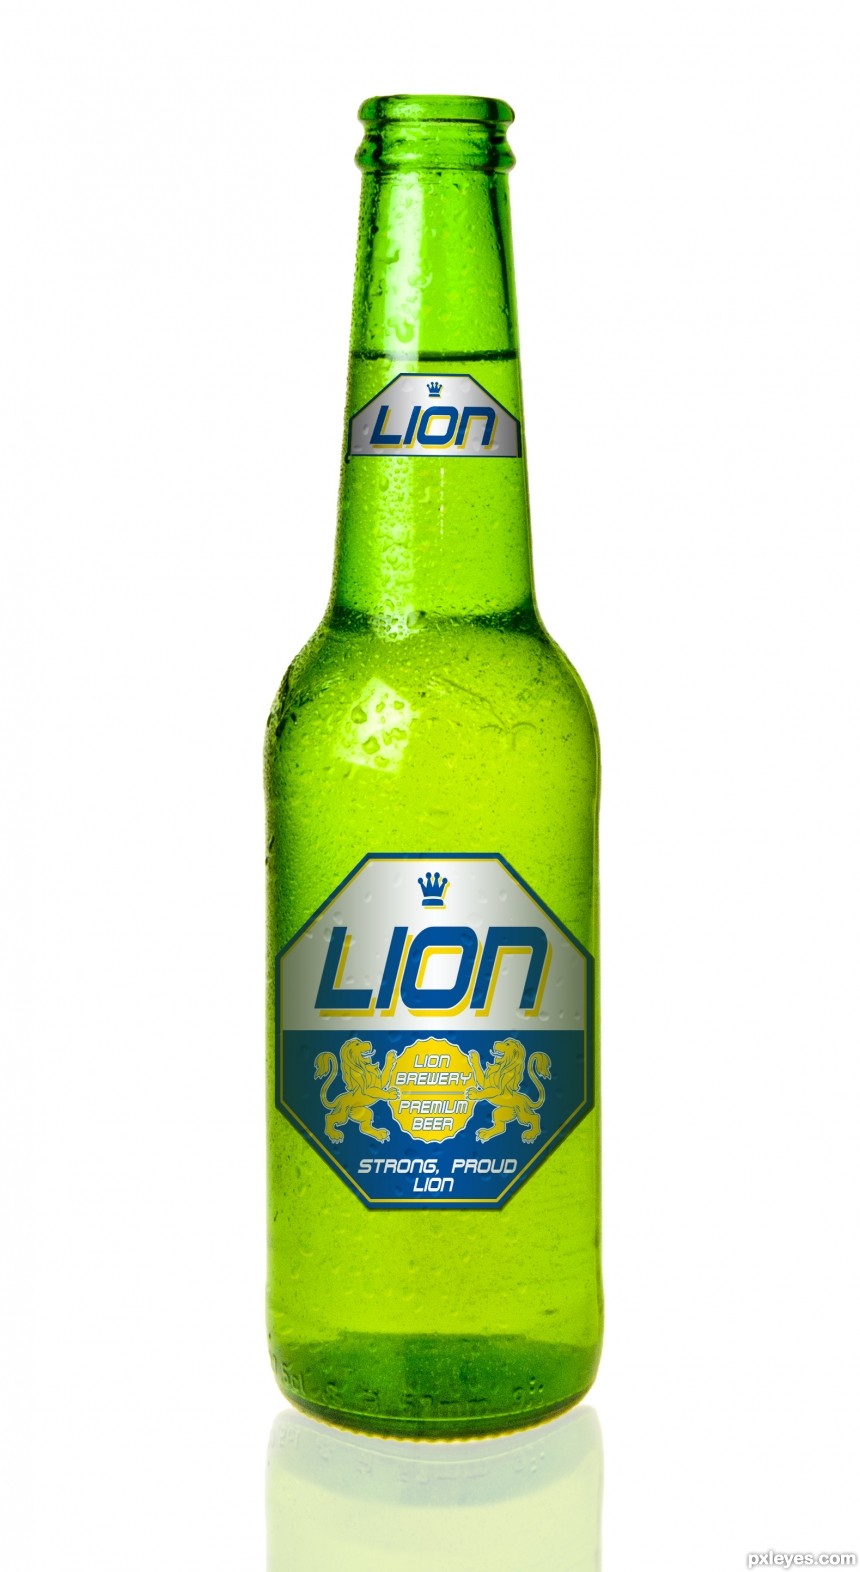 Lion beer photoshop picture)